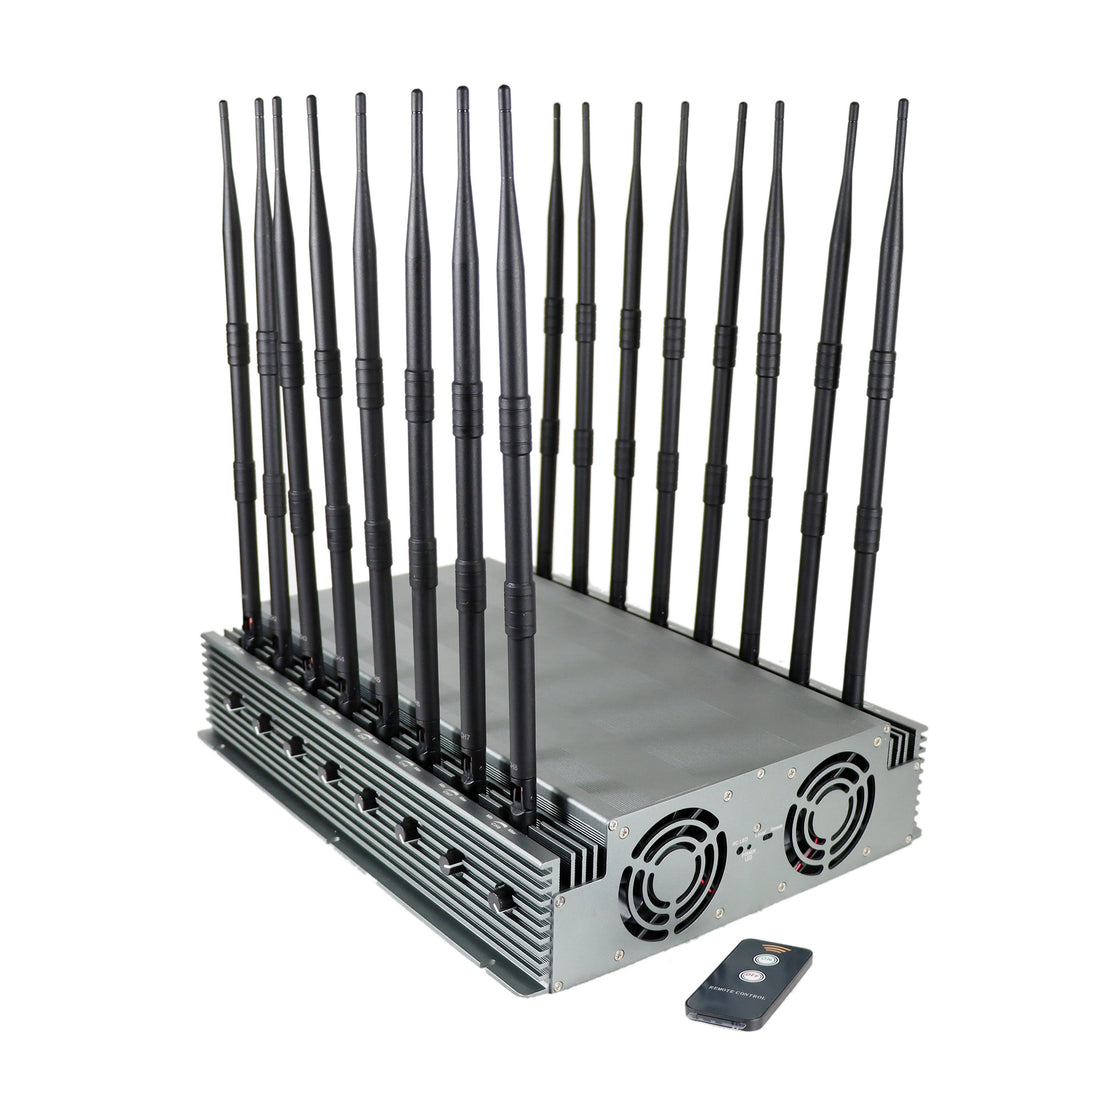 Does the examination room mobile phone signal jammer have blacklist and whitelist management functions?